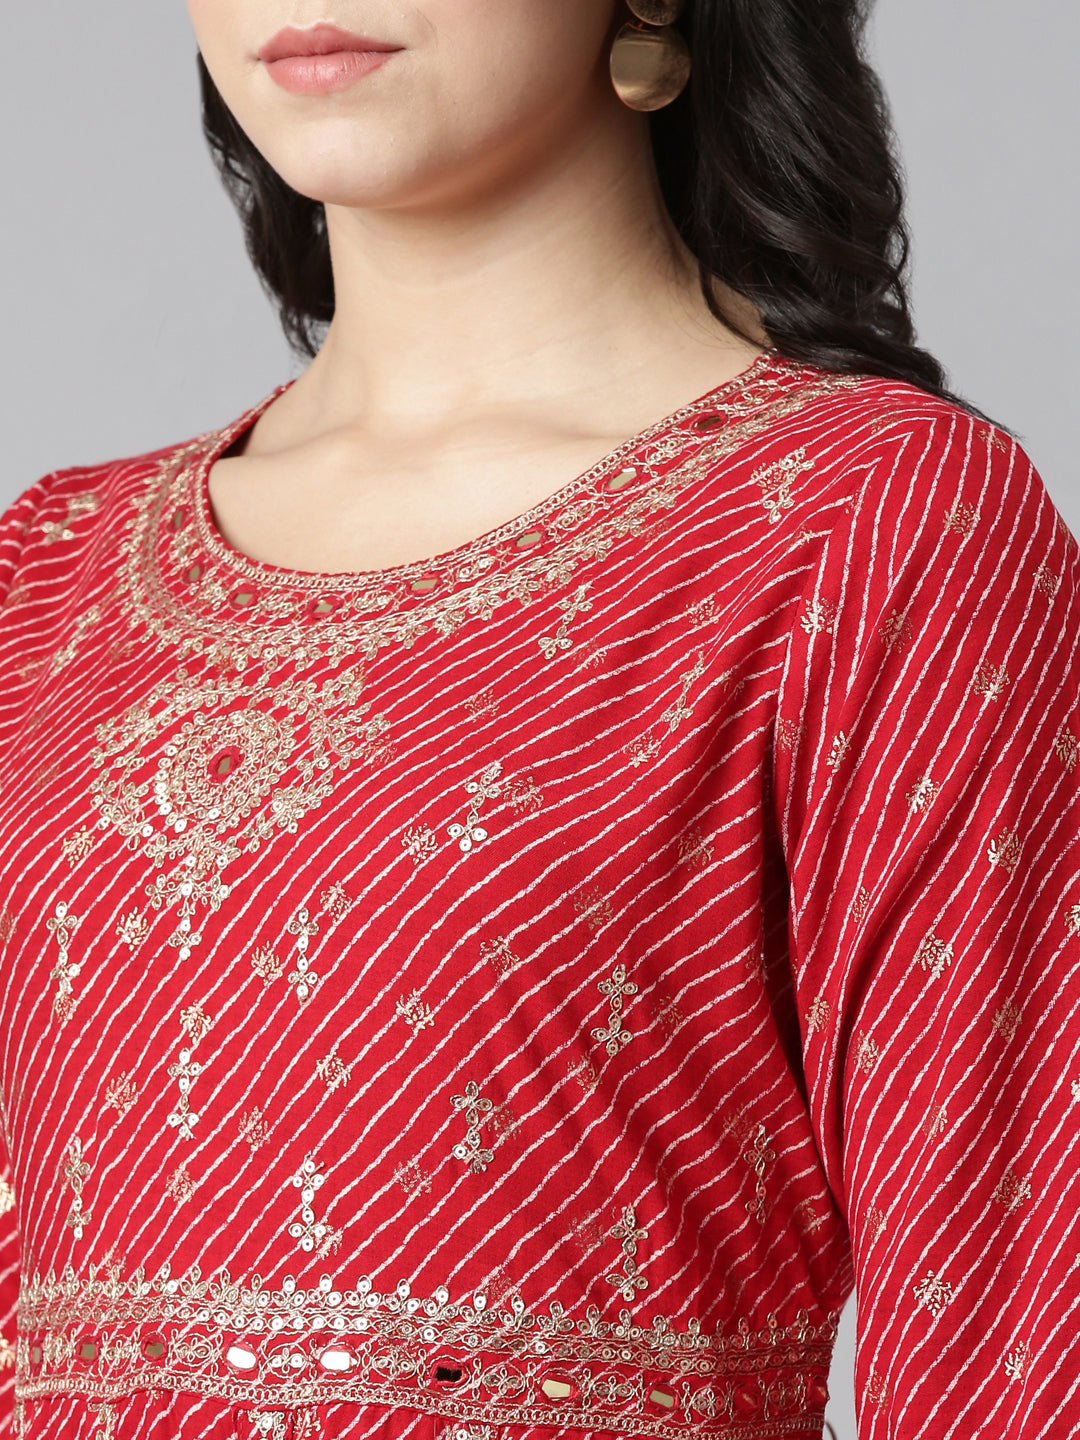 Neerus Red Pleated Straight Embroidered Kurta And Trousers With Dupatta